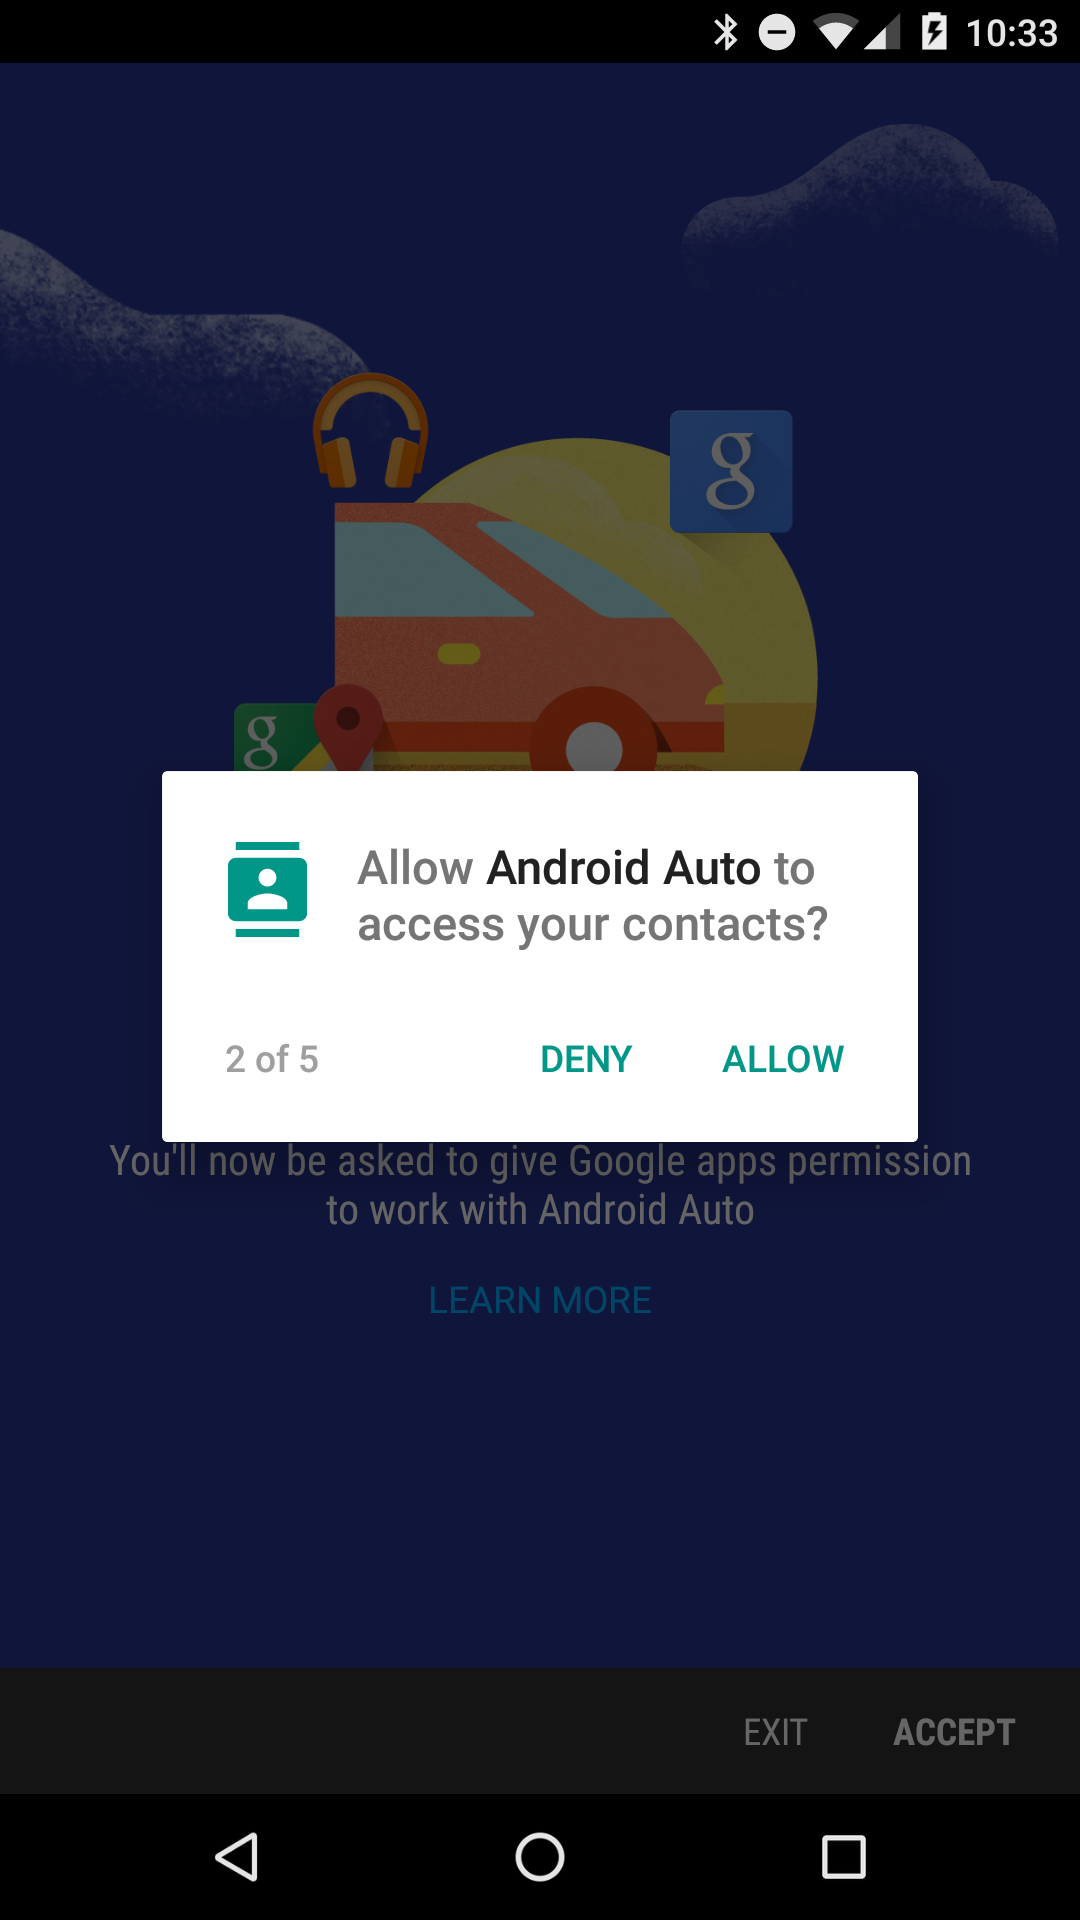 Android Auto and Android Marshmallow permissions